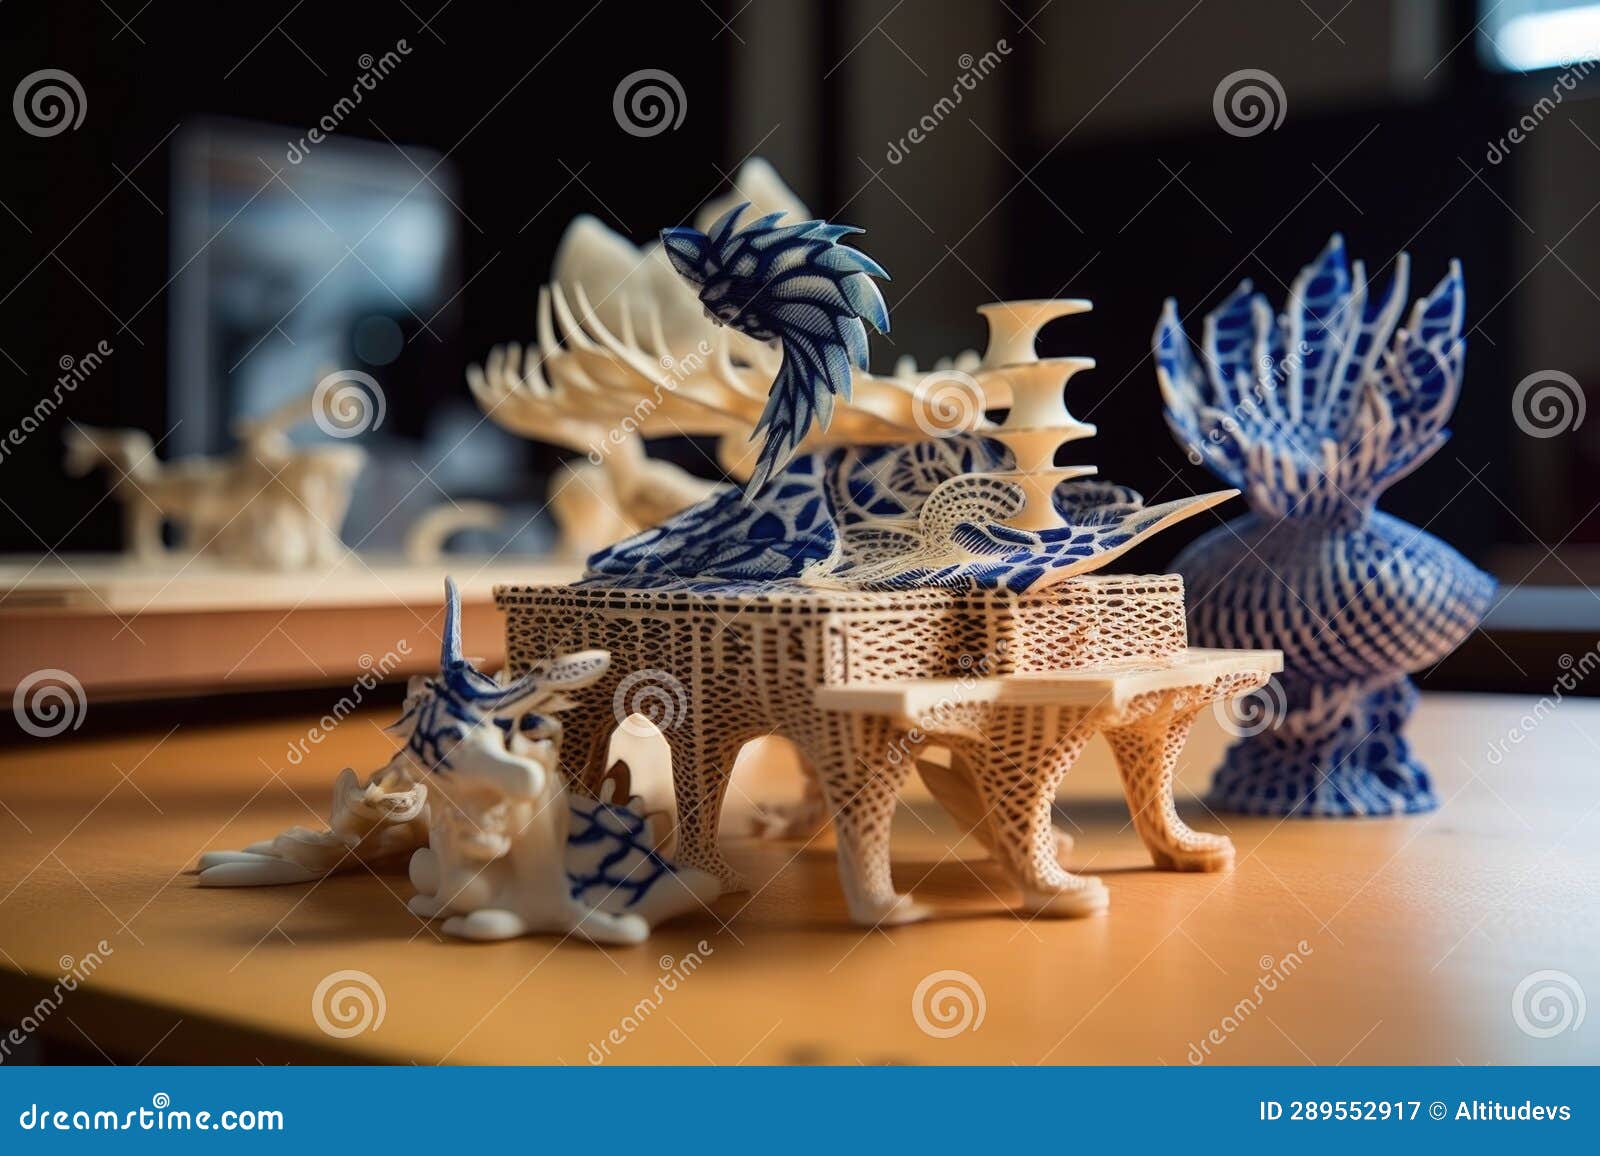 4d printed objects transforming on a table